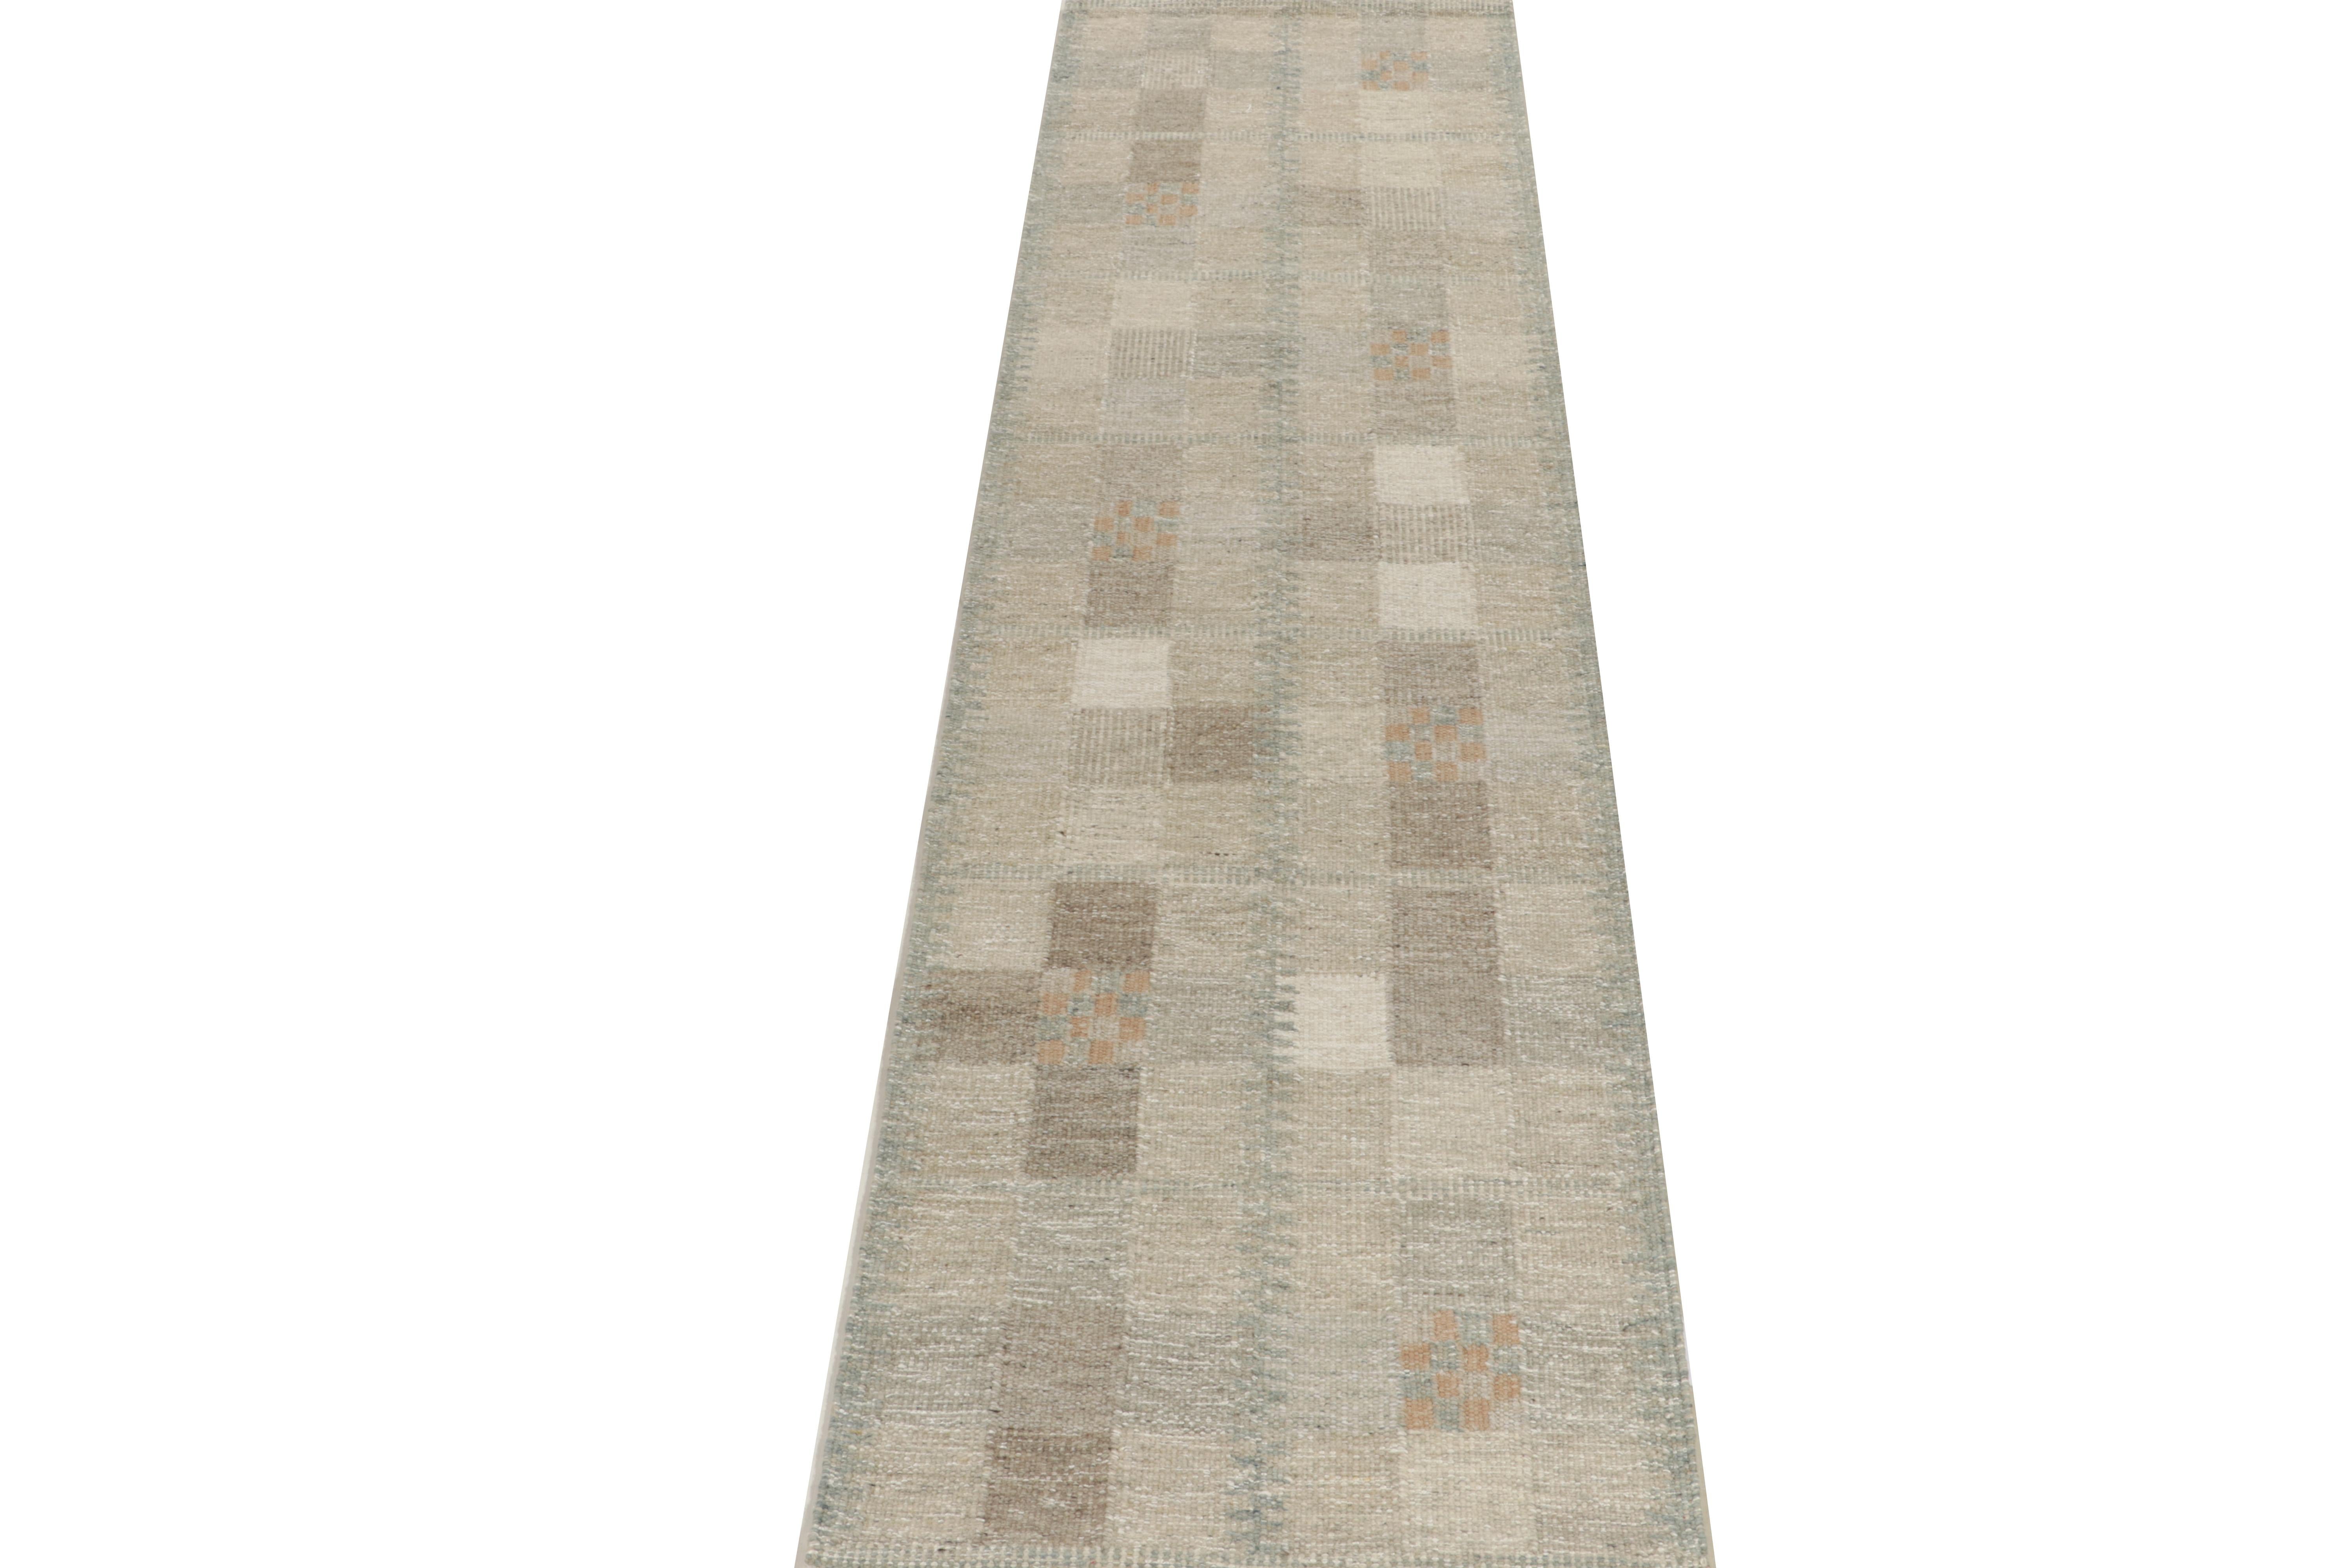 A 3x12 Swedish style kilim runner from our award-winning Scandinavian flat weave selections. The rug showcases a sophisticated play of beige-brown with gray blue for a cool mood expertly married to the geometry for a defined movement. Handwoven in